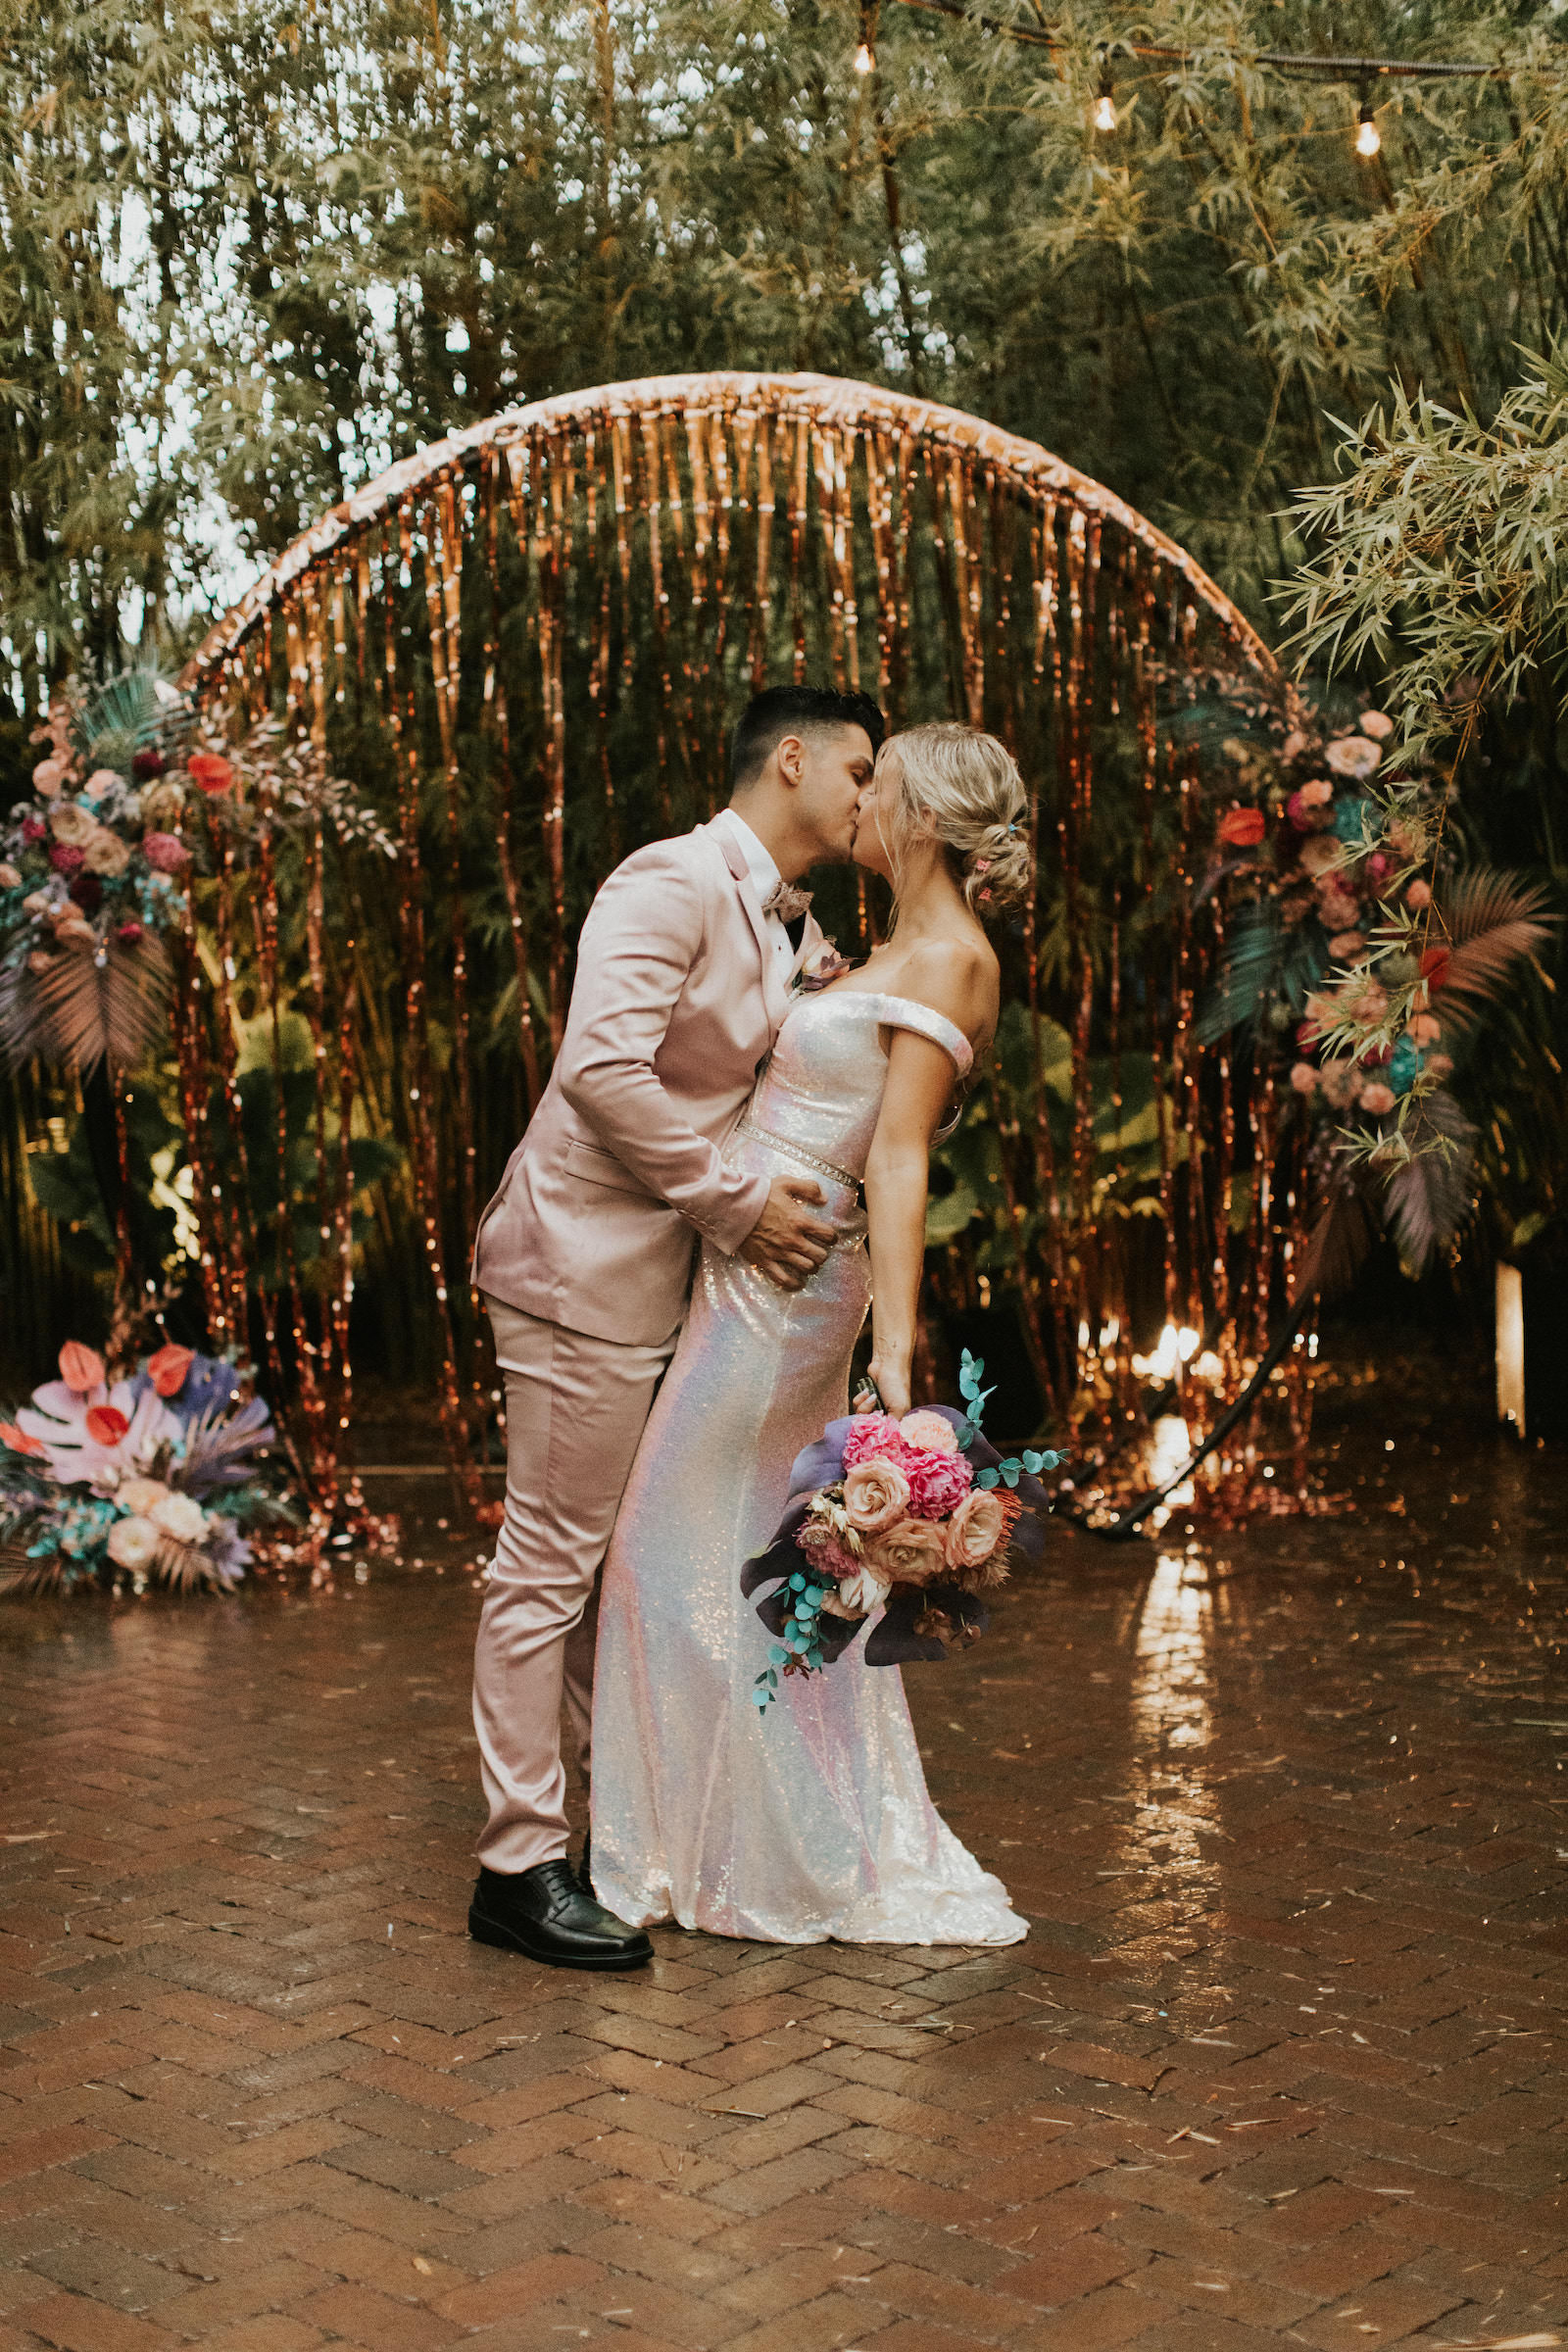 Iridescent Pastel 90's Wedding Inspiration | Wedding Arch Backdrop with Rose Gold Tinsel Curtain and Pastel Flower Arrangements with Painted Leaves | Bride and Groom Portrait with Blush Pink Suit and Shimmer Silver Wedding Dress | Downtown St. Pete Wedding Venue NOVA 535